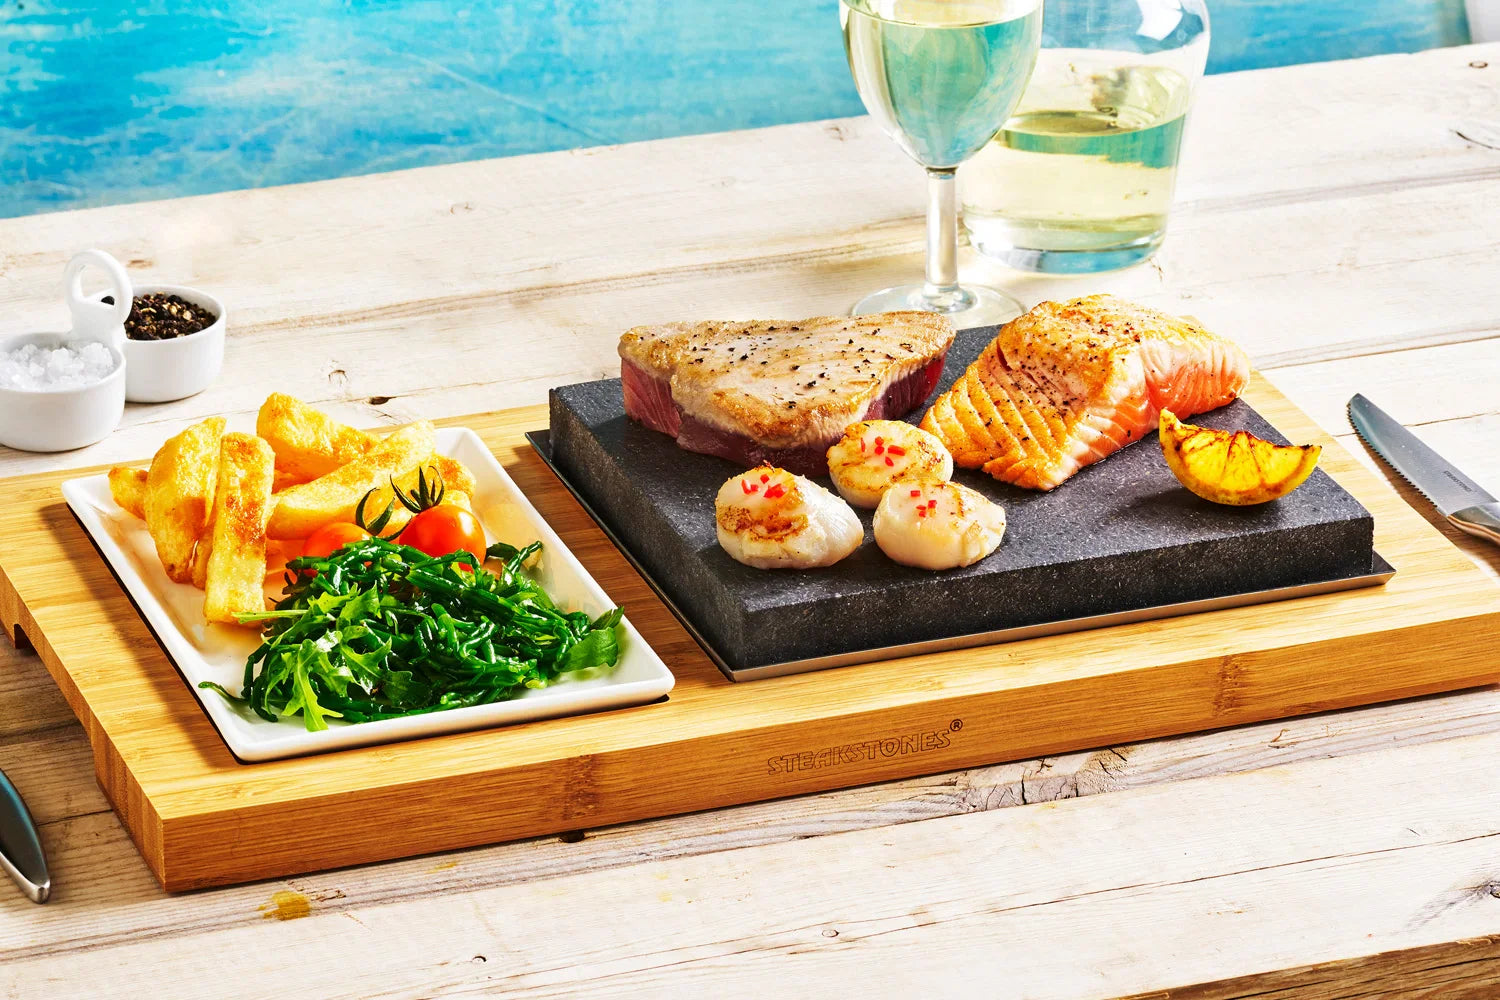 SIZZLING STEAK PLATE SET (SS002) – BUY 6 SETS AND GLOVES